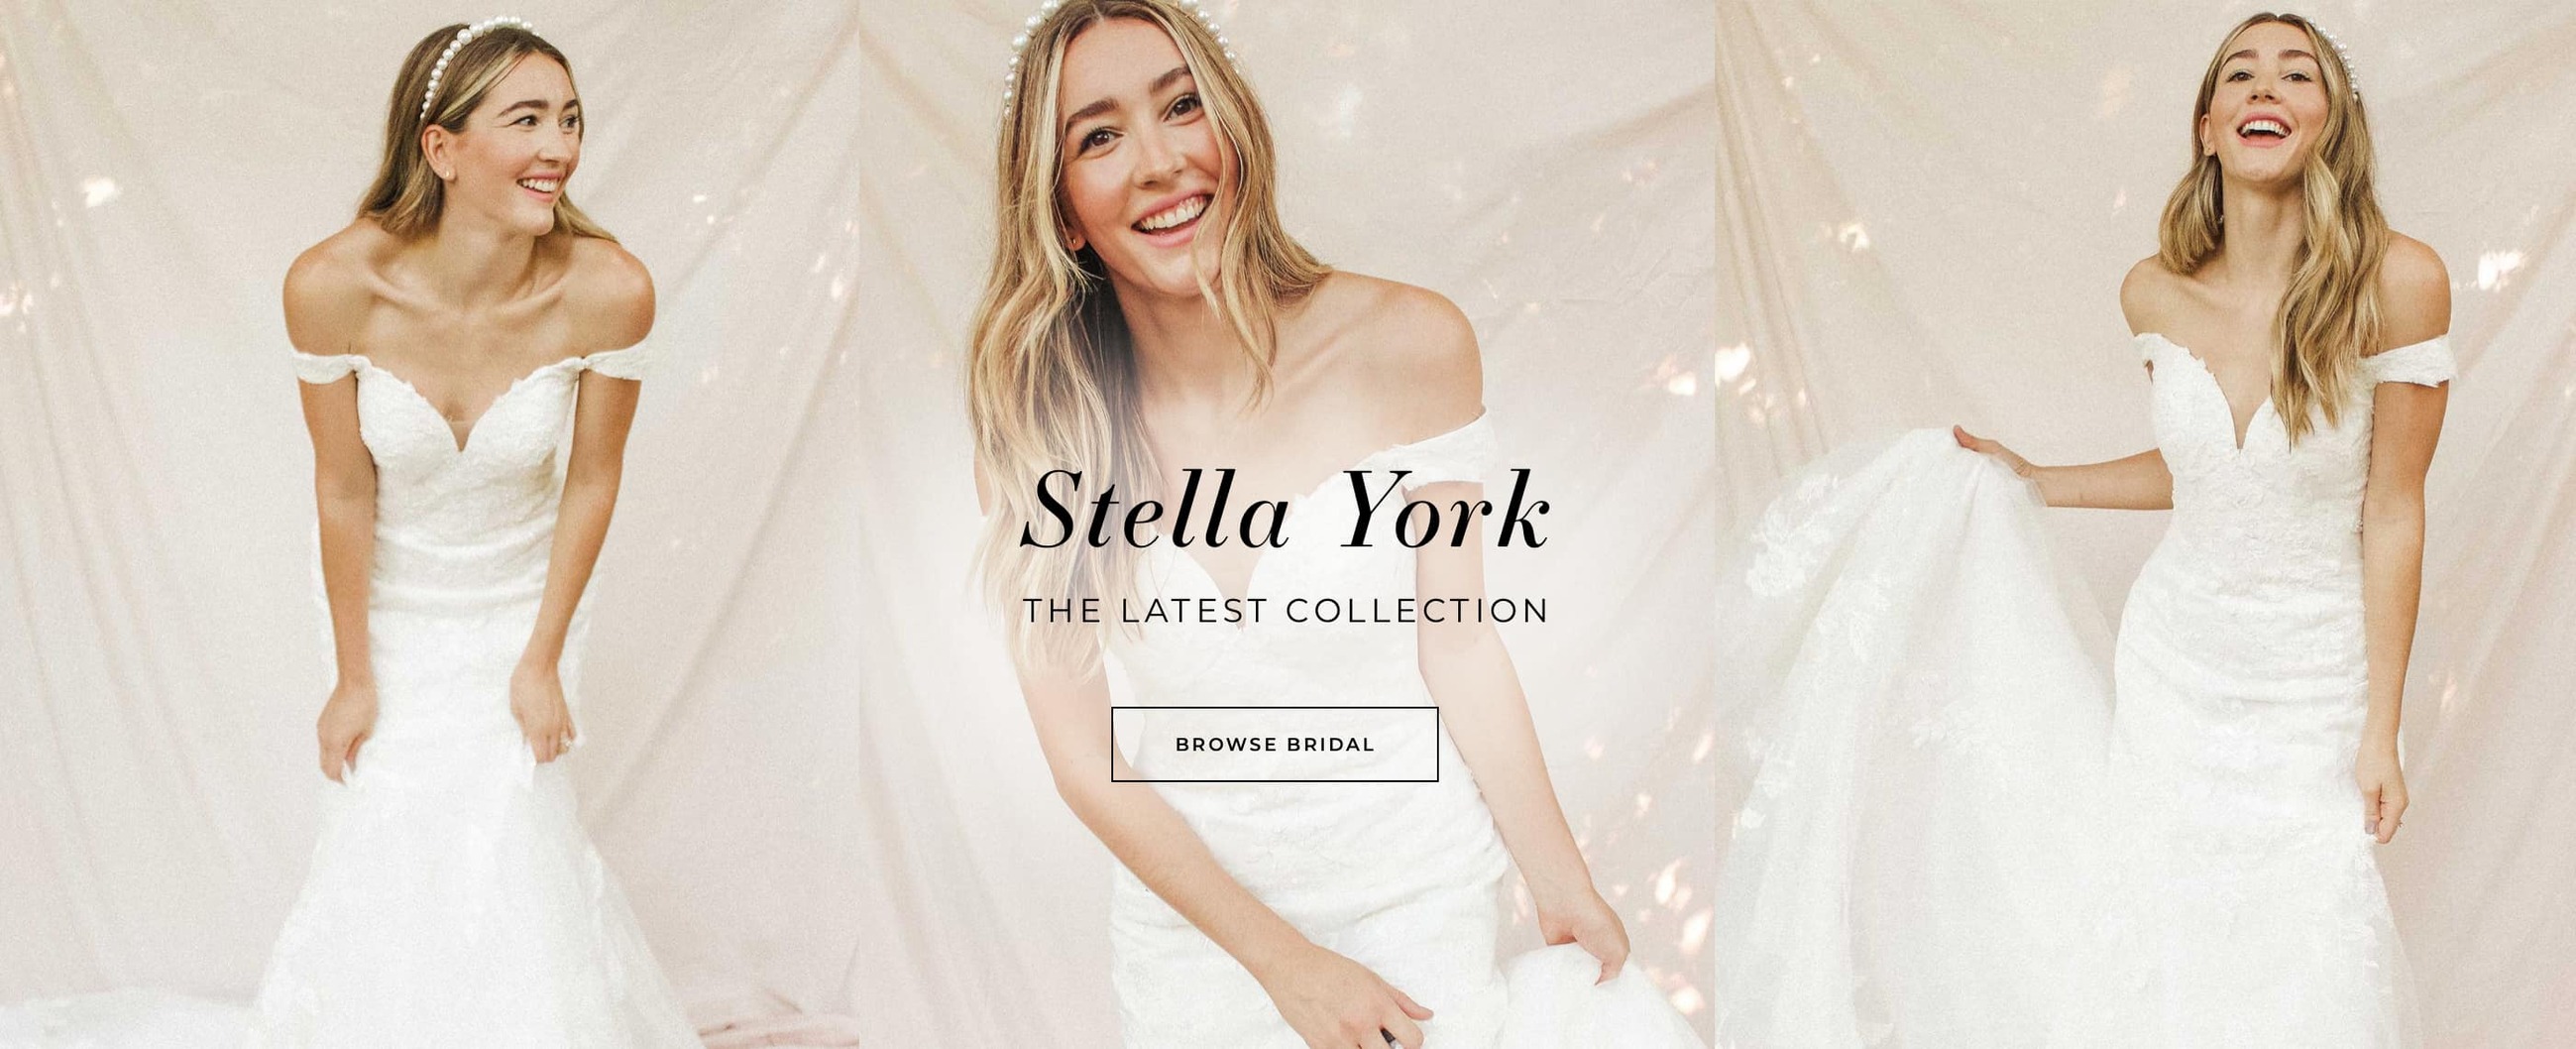 Woman with blonde hair wearing a Stella York wedding gown